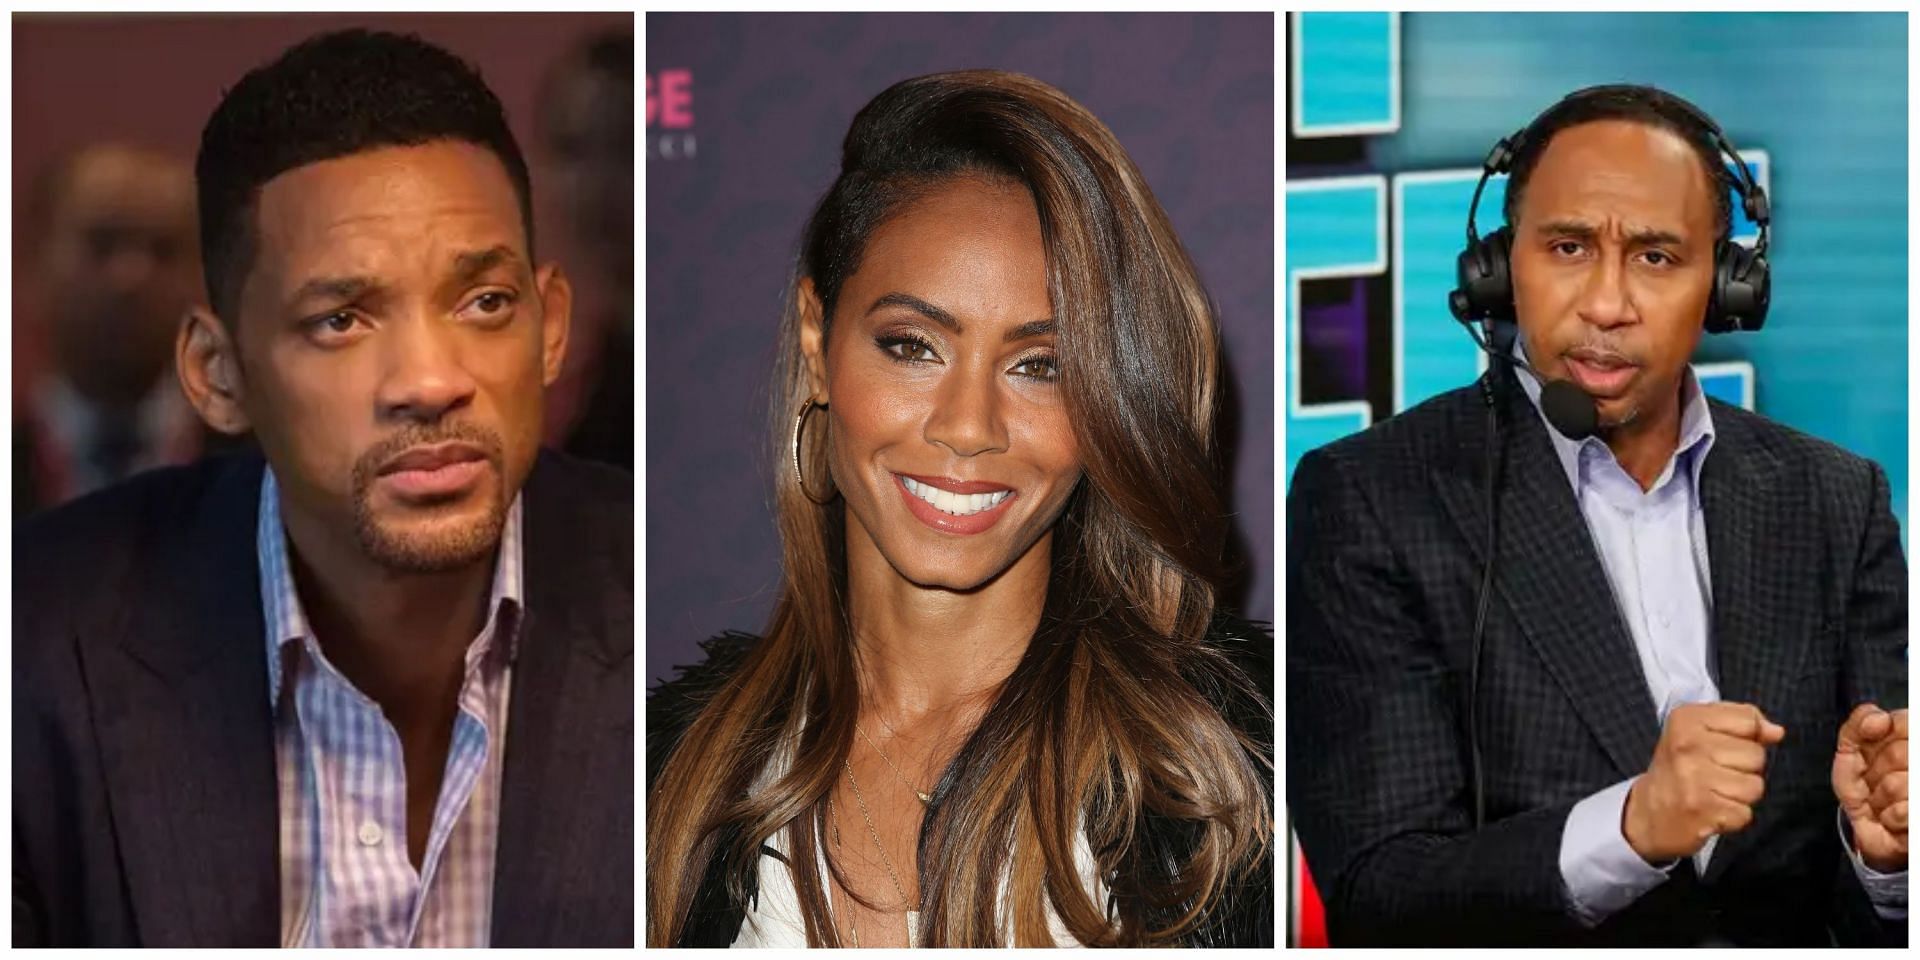 Stephen A. Smith has a hot take on what he thinks about Jada Pinkett-Smith and Will Smith.